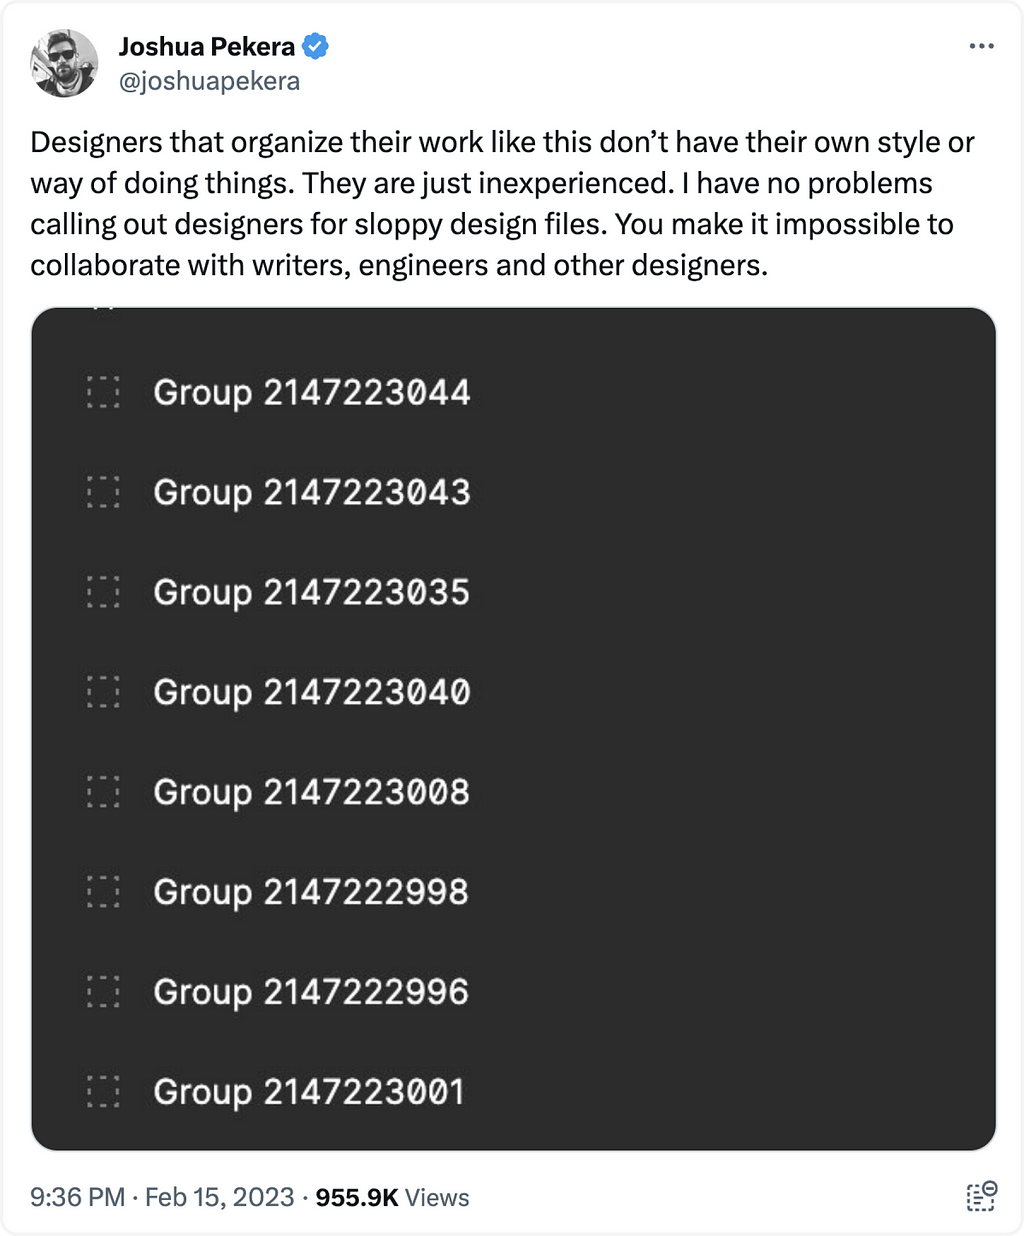 A tweet criticizing designers who have disorganized Figma files, suggesting they lack personal style or experience. It says these messy files make it impossible to collaborate with writers, engineers and other designers. The tweet calls out designers with sloppy files for making collaboration difficult.